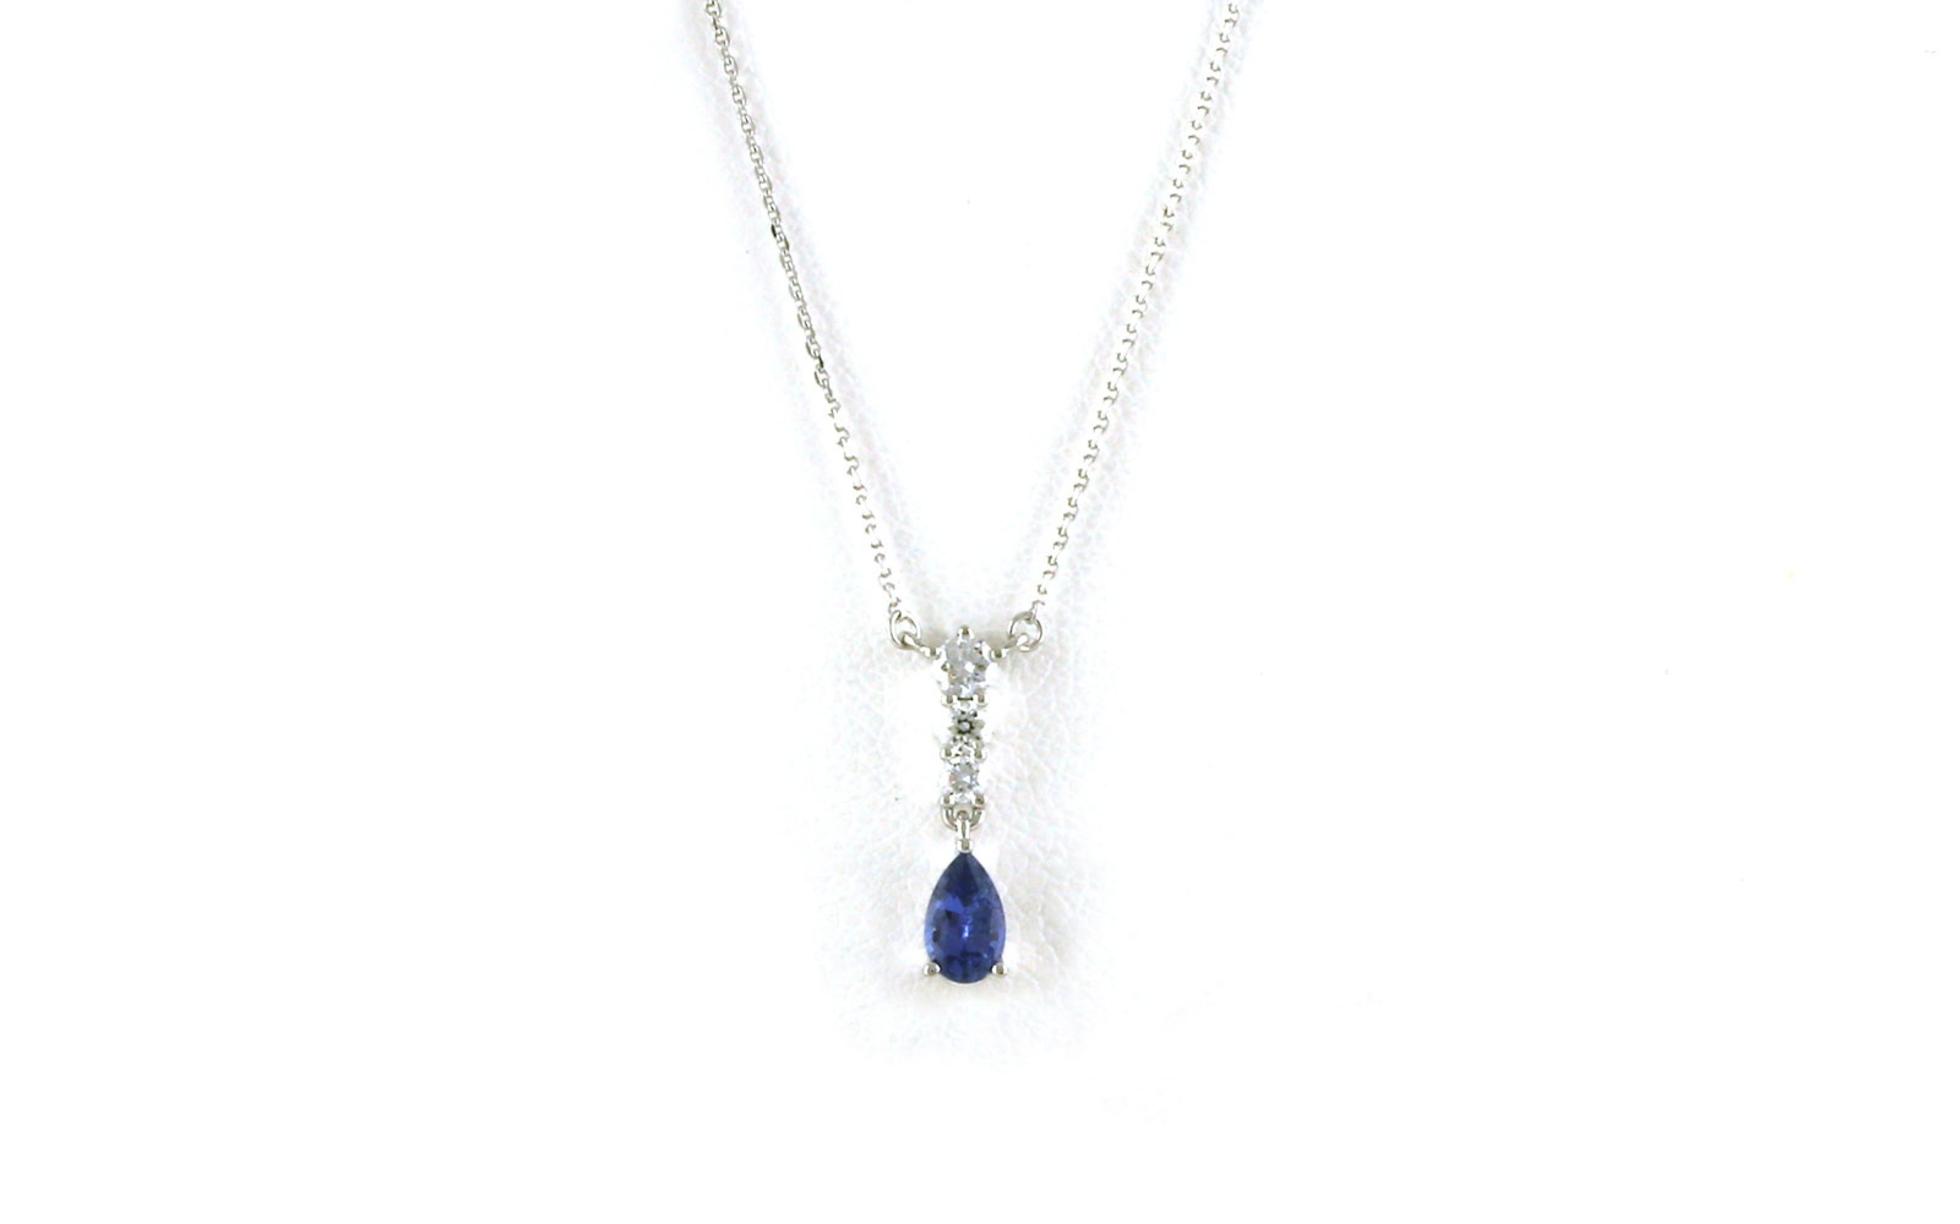 4-Stone Vertical Drop Montana Yogo Sapphire and Diamond Necklace in White Gold (0.35cts TWT)